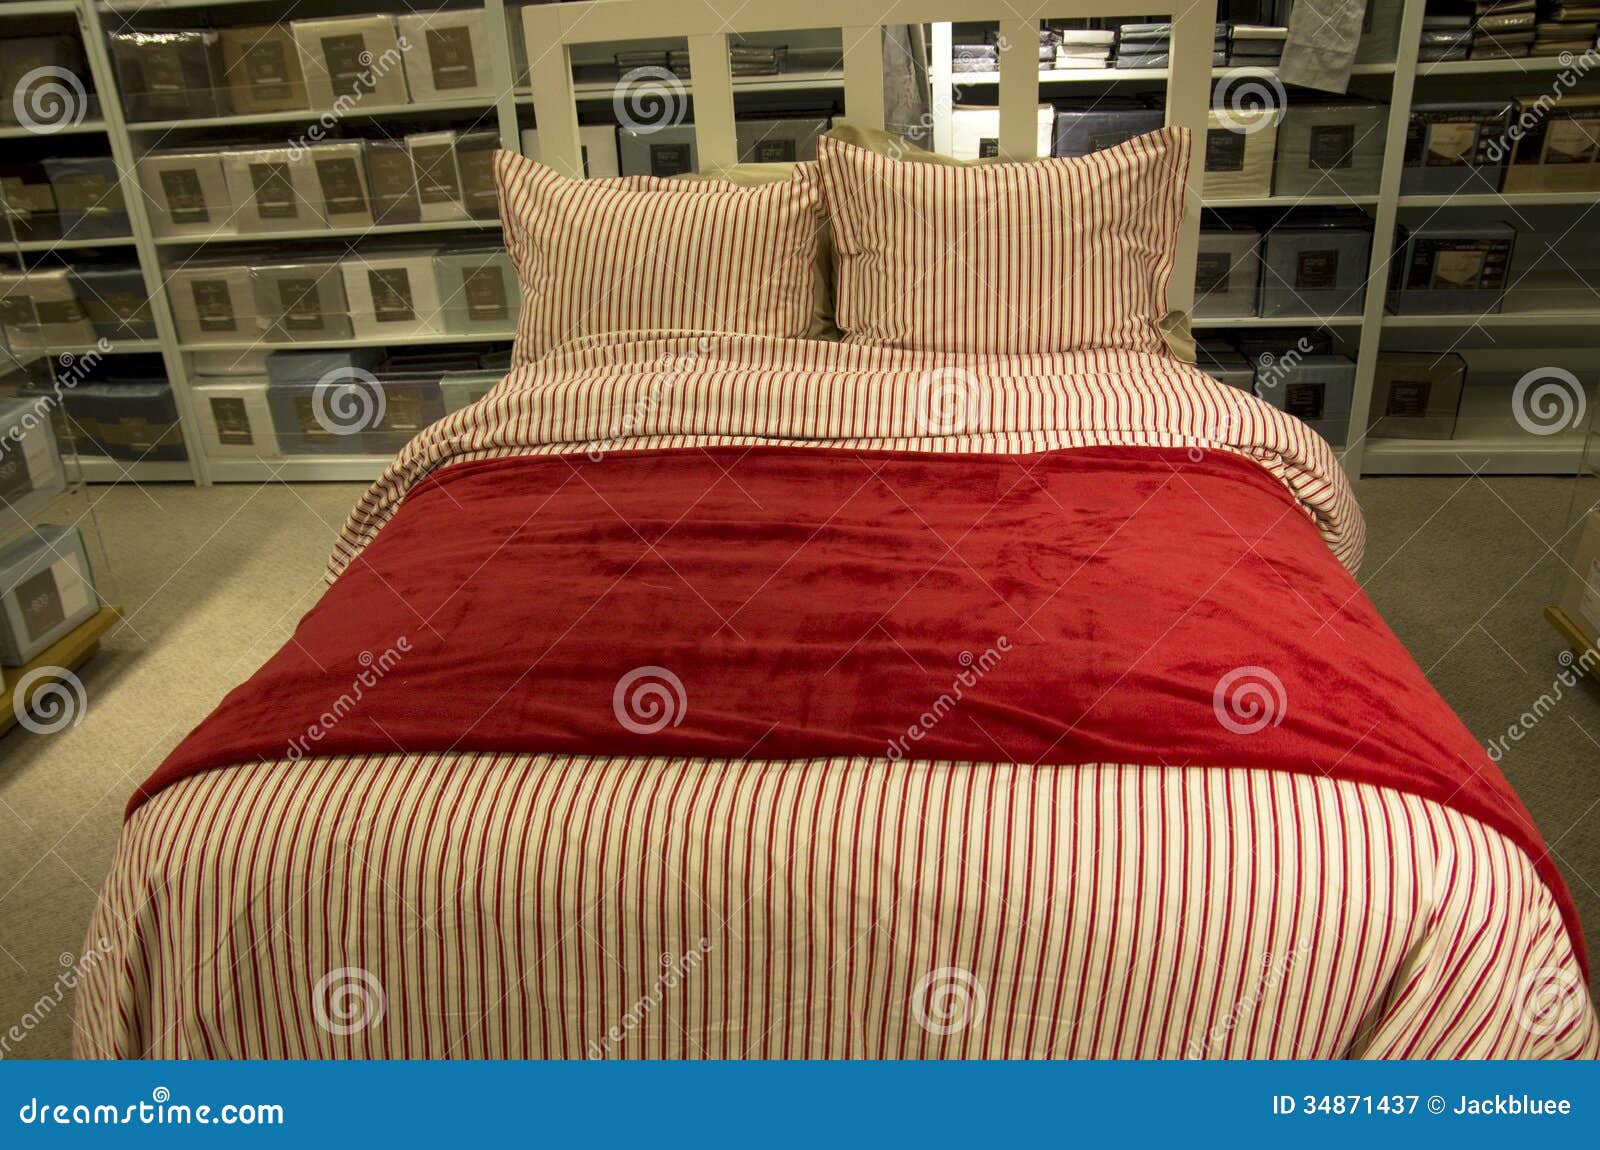 Home Bedroom Decor Furniture Store Royalty Free Stock Photography ...